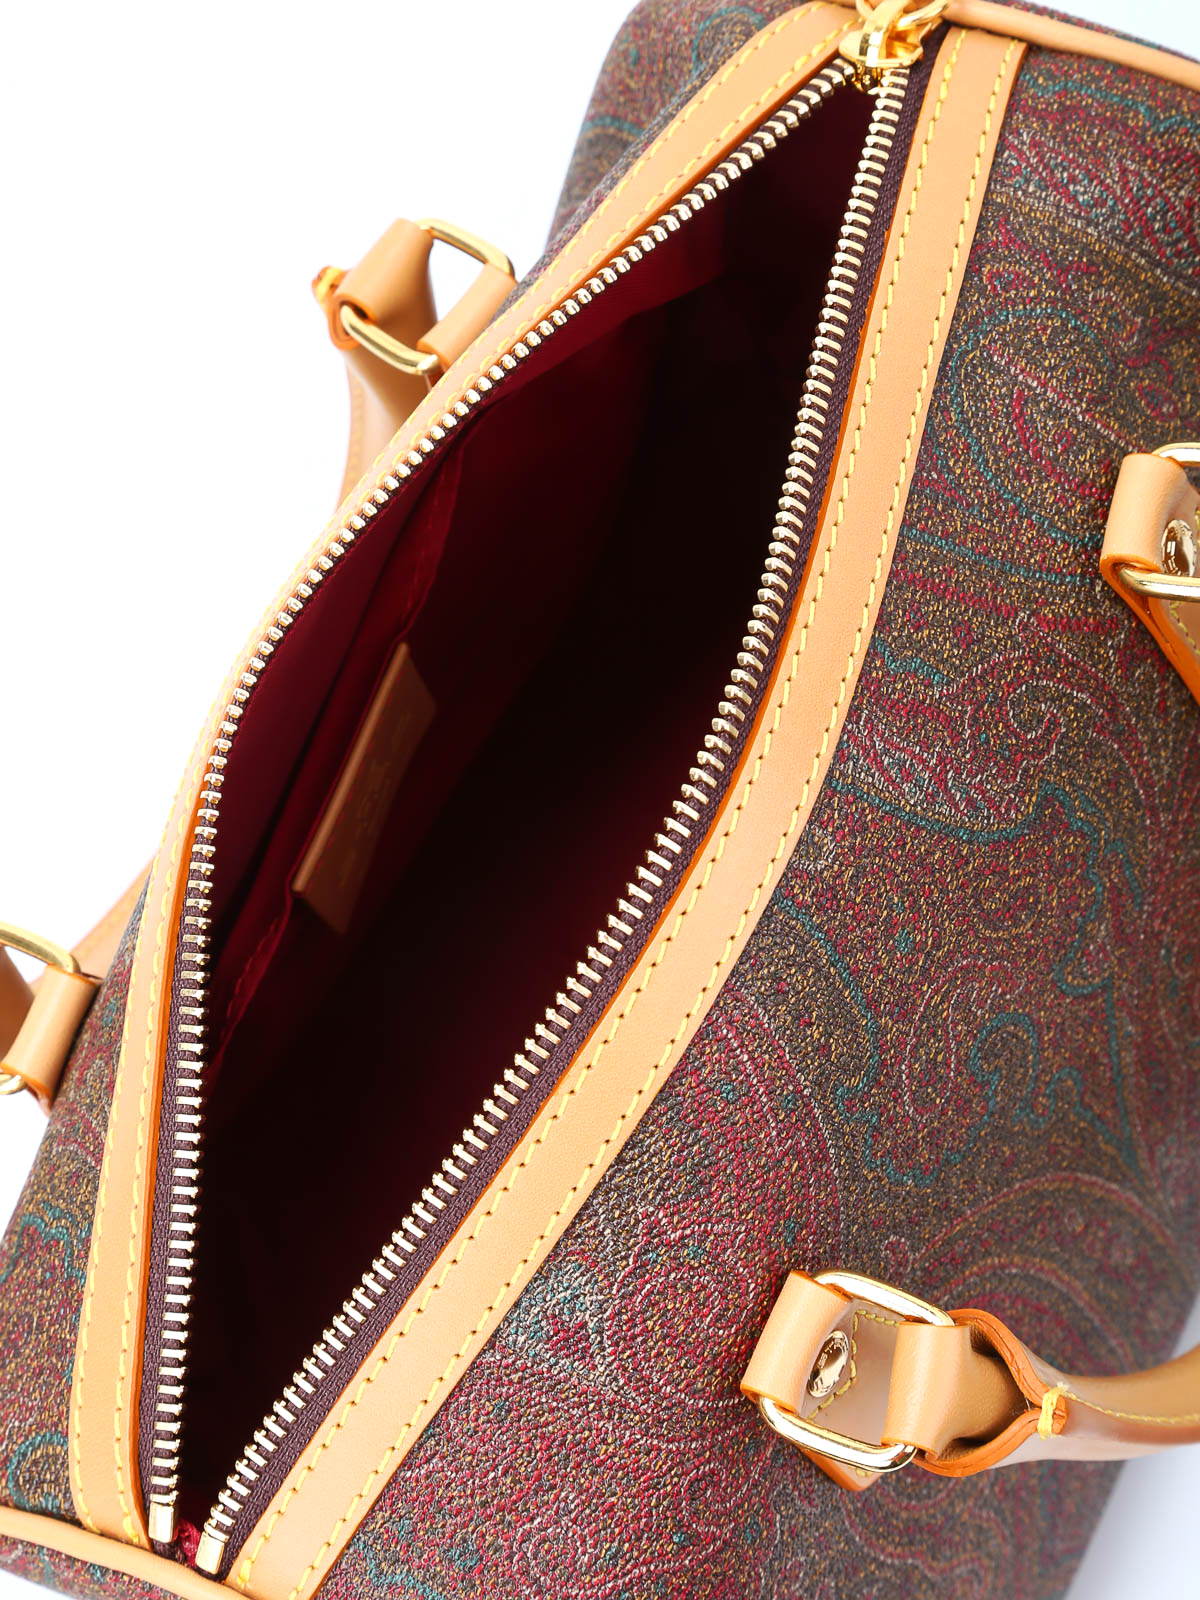 Etro Boston Bag in Brown Paisley Printed Coated Canvas and Leather Trim